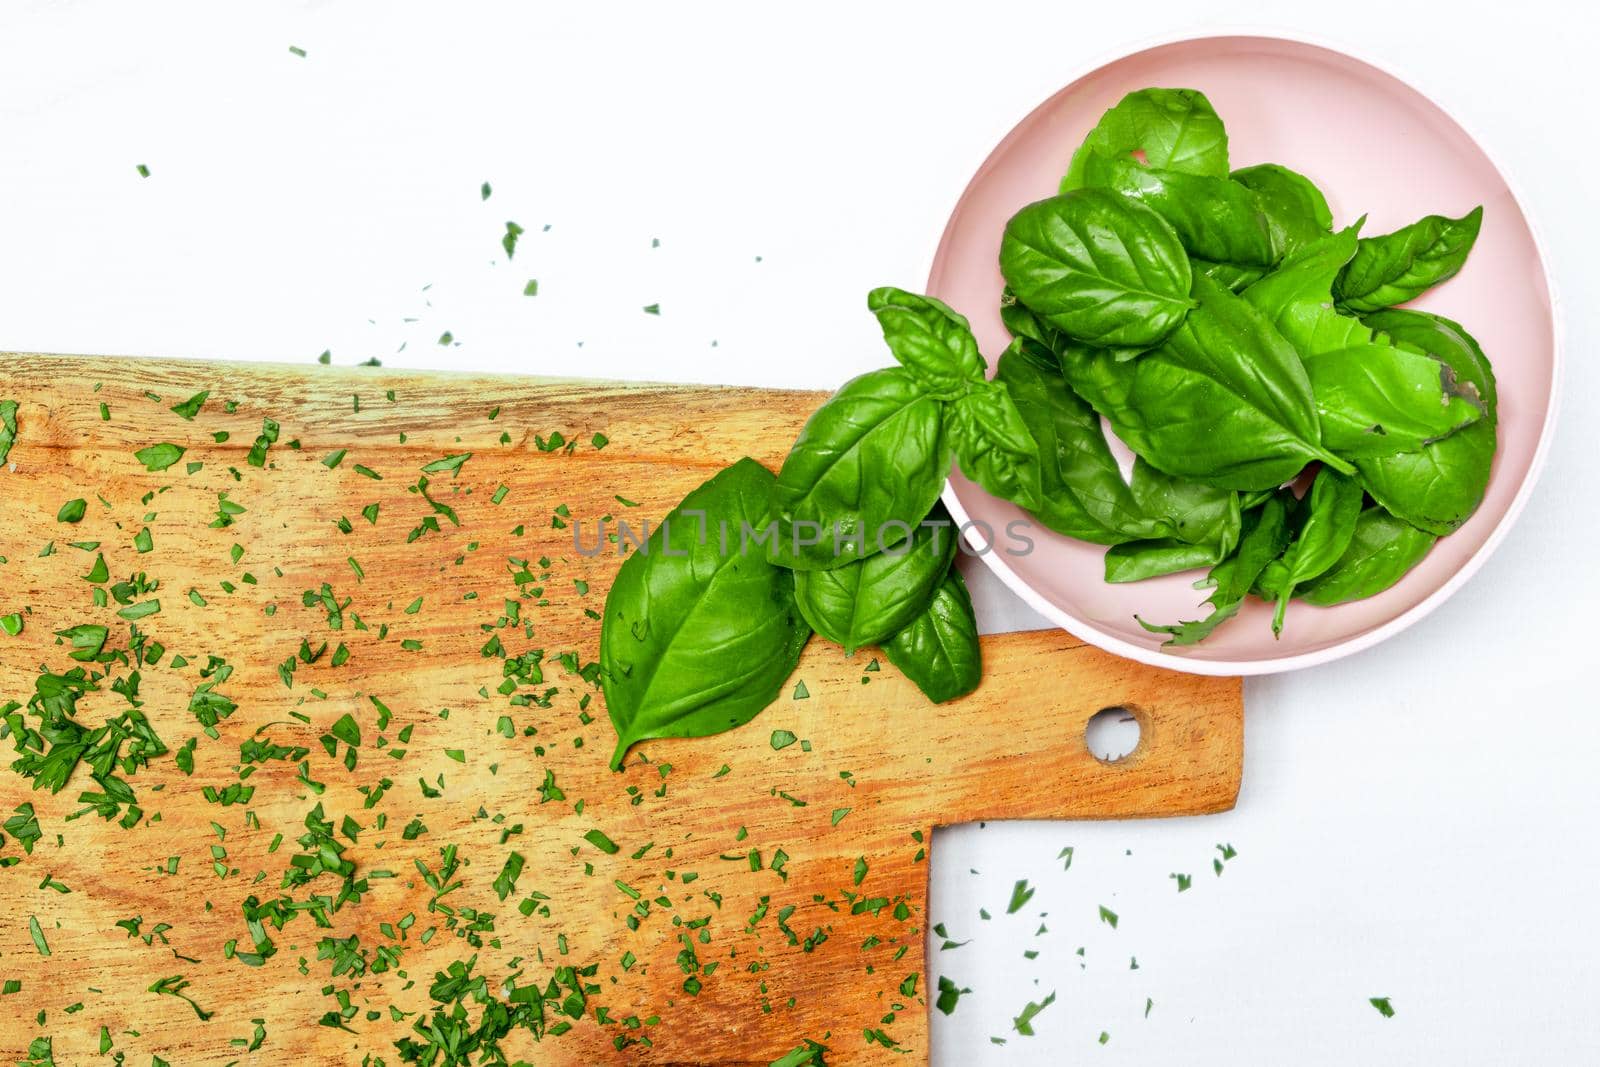 Fresh basil leaves in a small bowl next to a wooden cutting board on a white marble surface. Fresh, healthy and natural food concept. Copy space. by hdcaputo